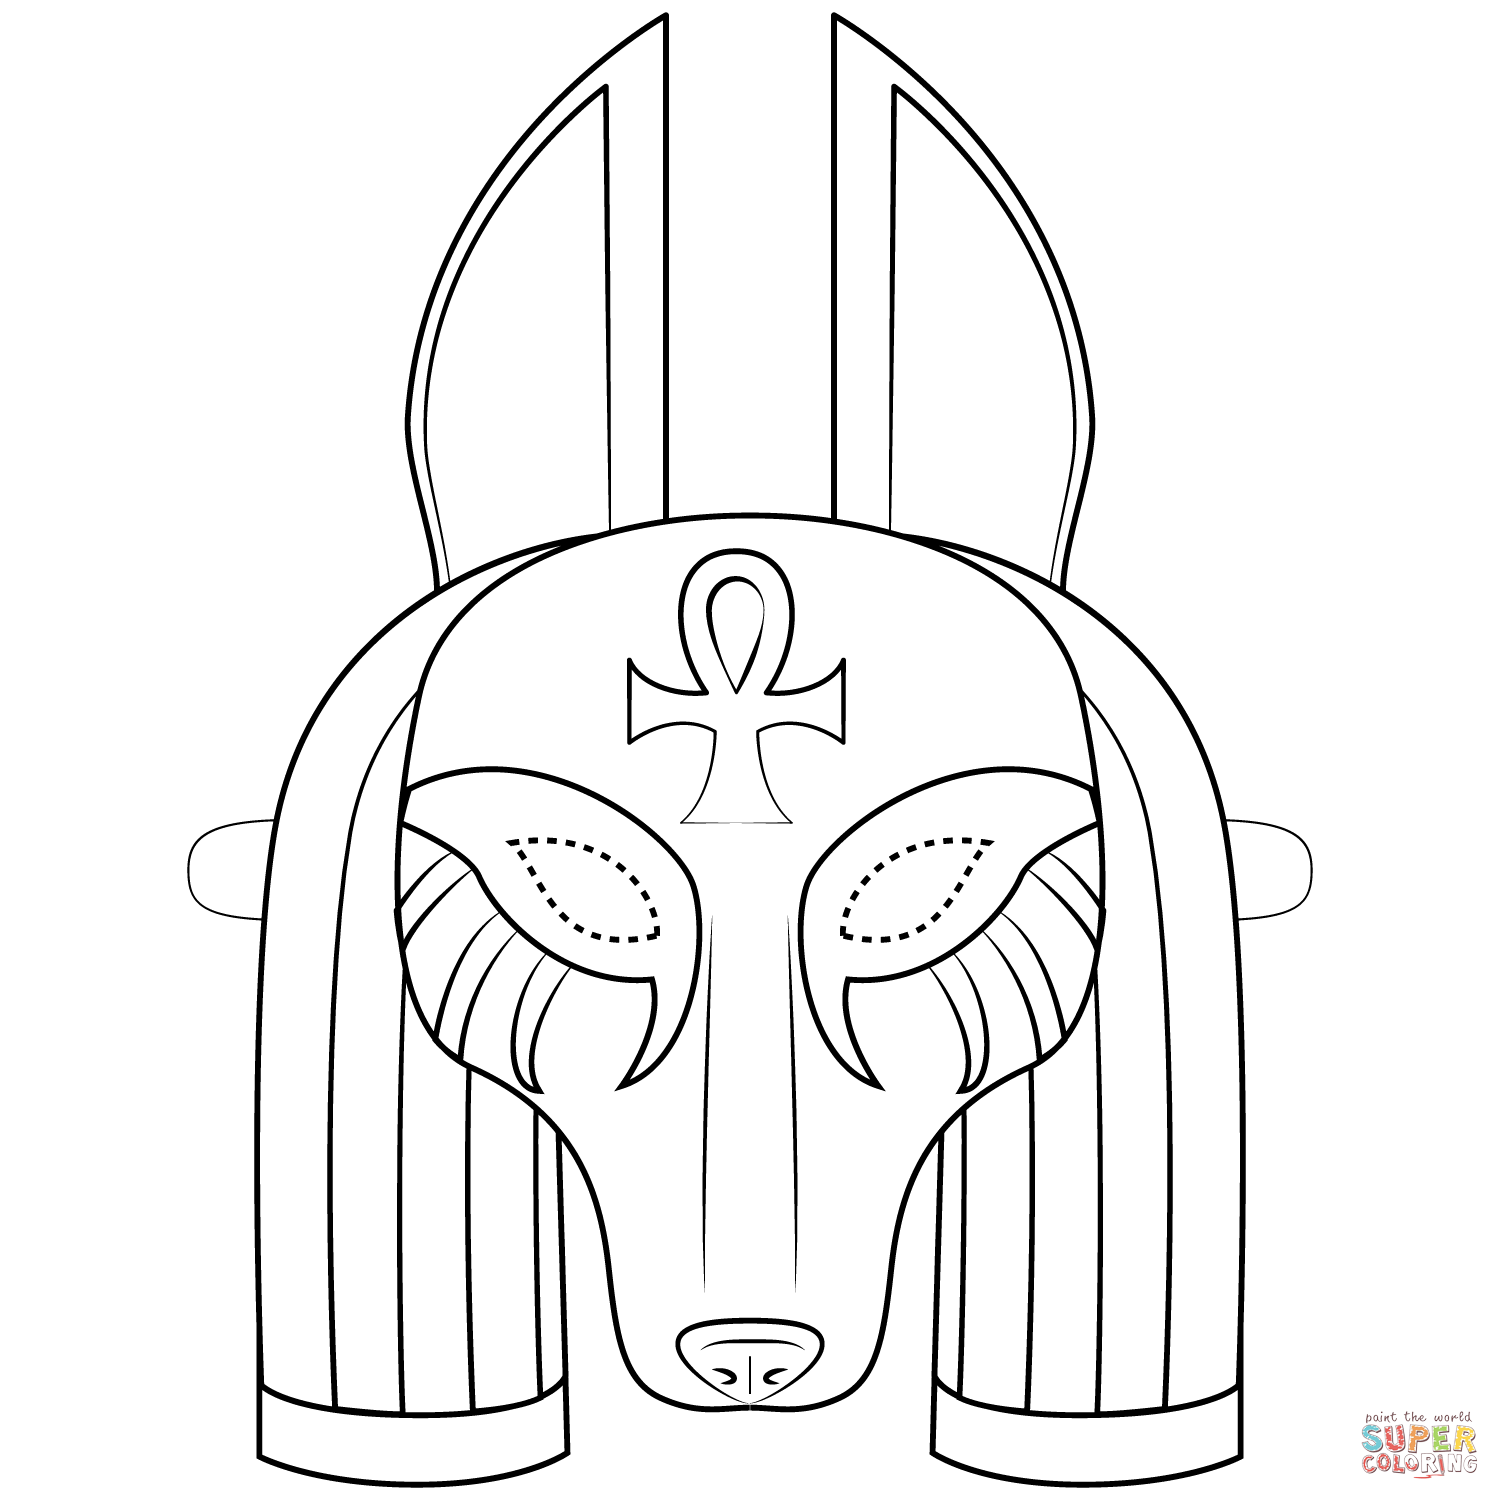 Anubis Mask coloring page | Free Printable Coloring Pages